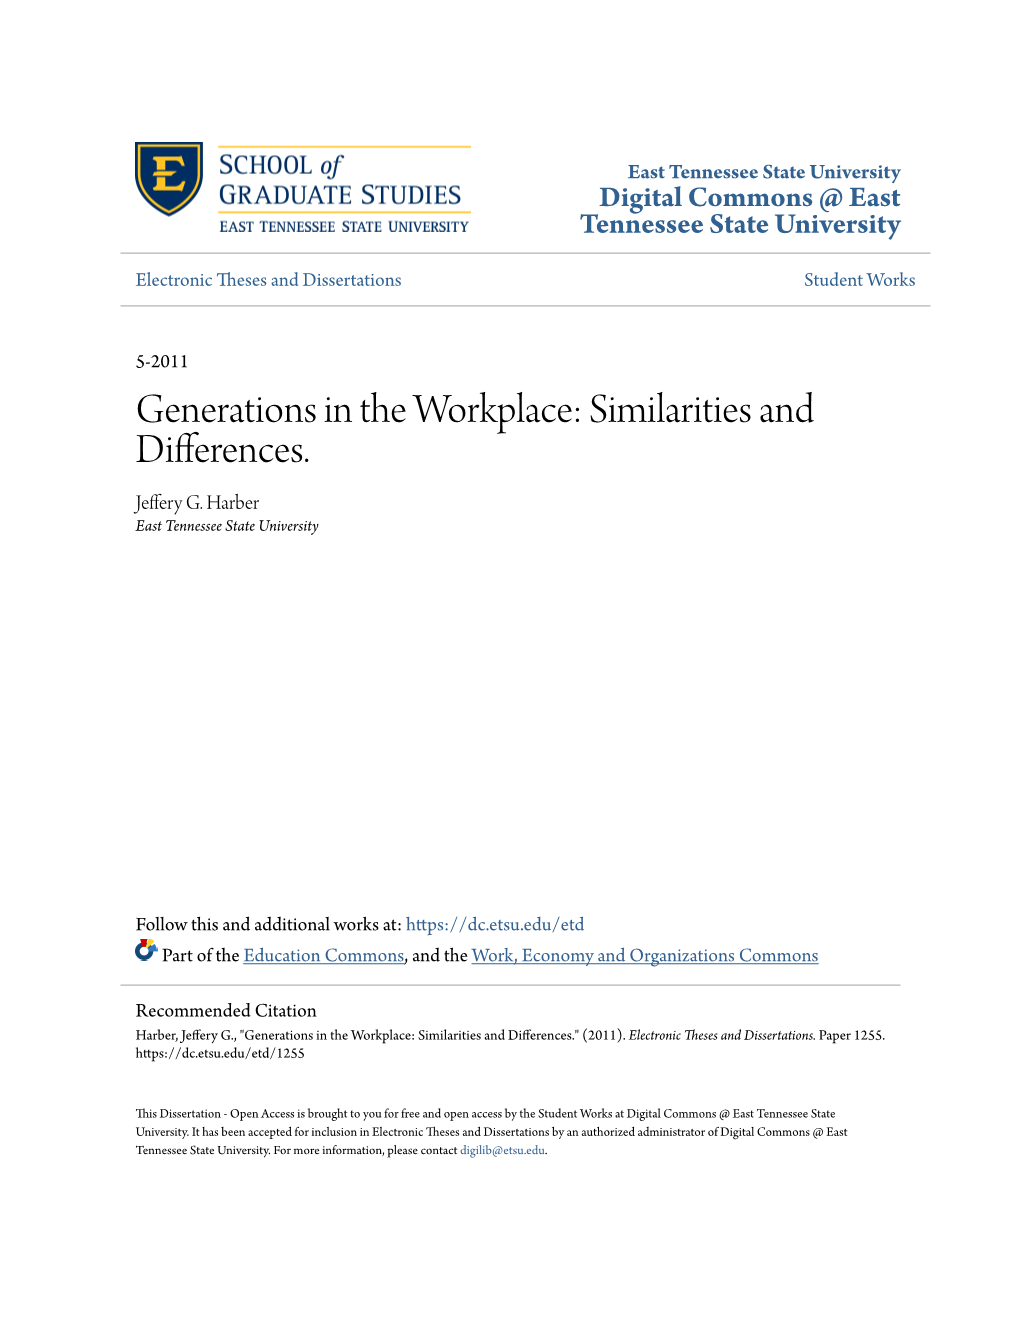 Generations in the Workplace: Similarities and Differences. Jeffery G